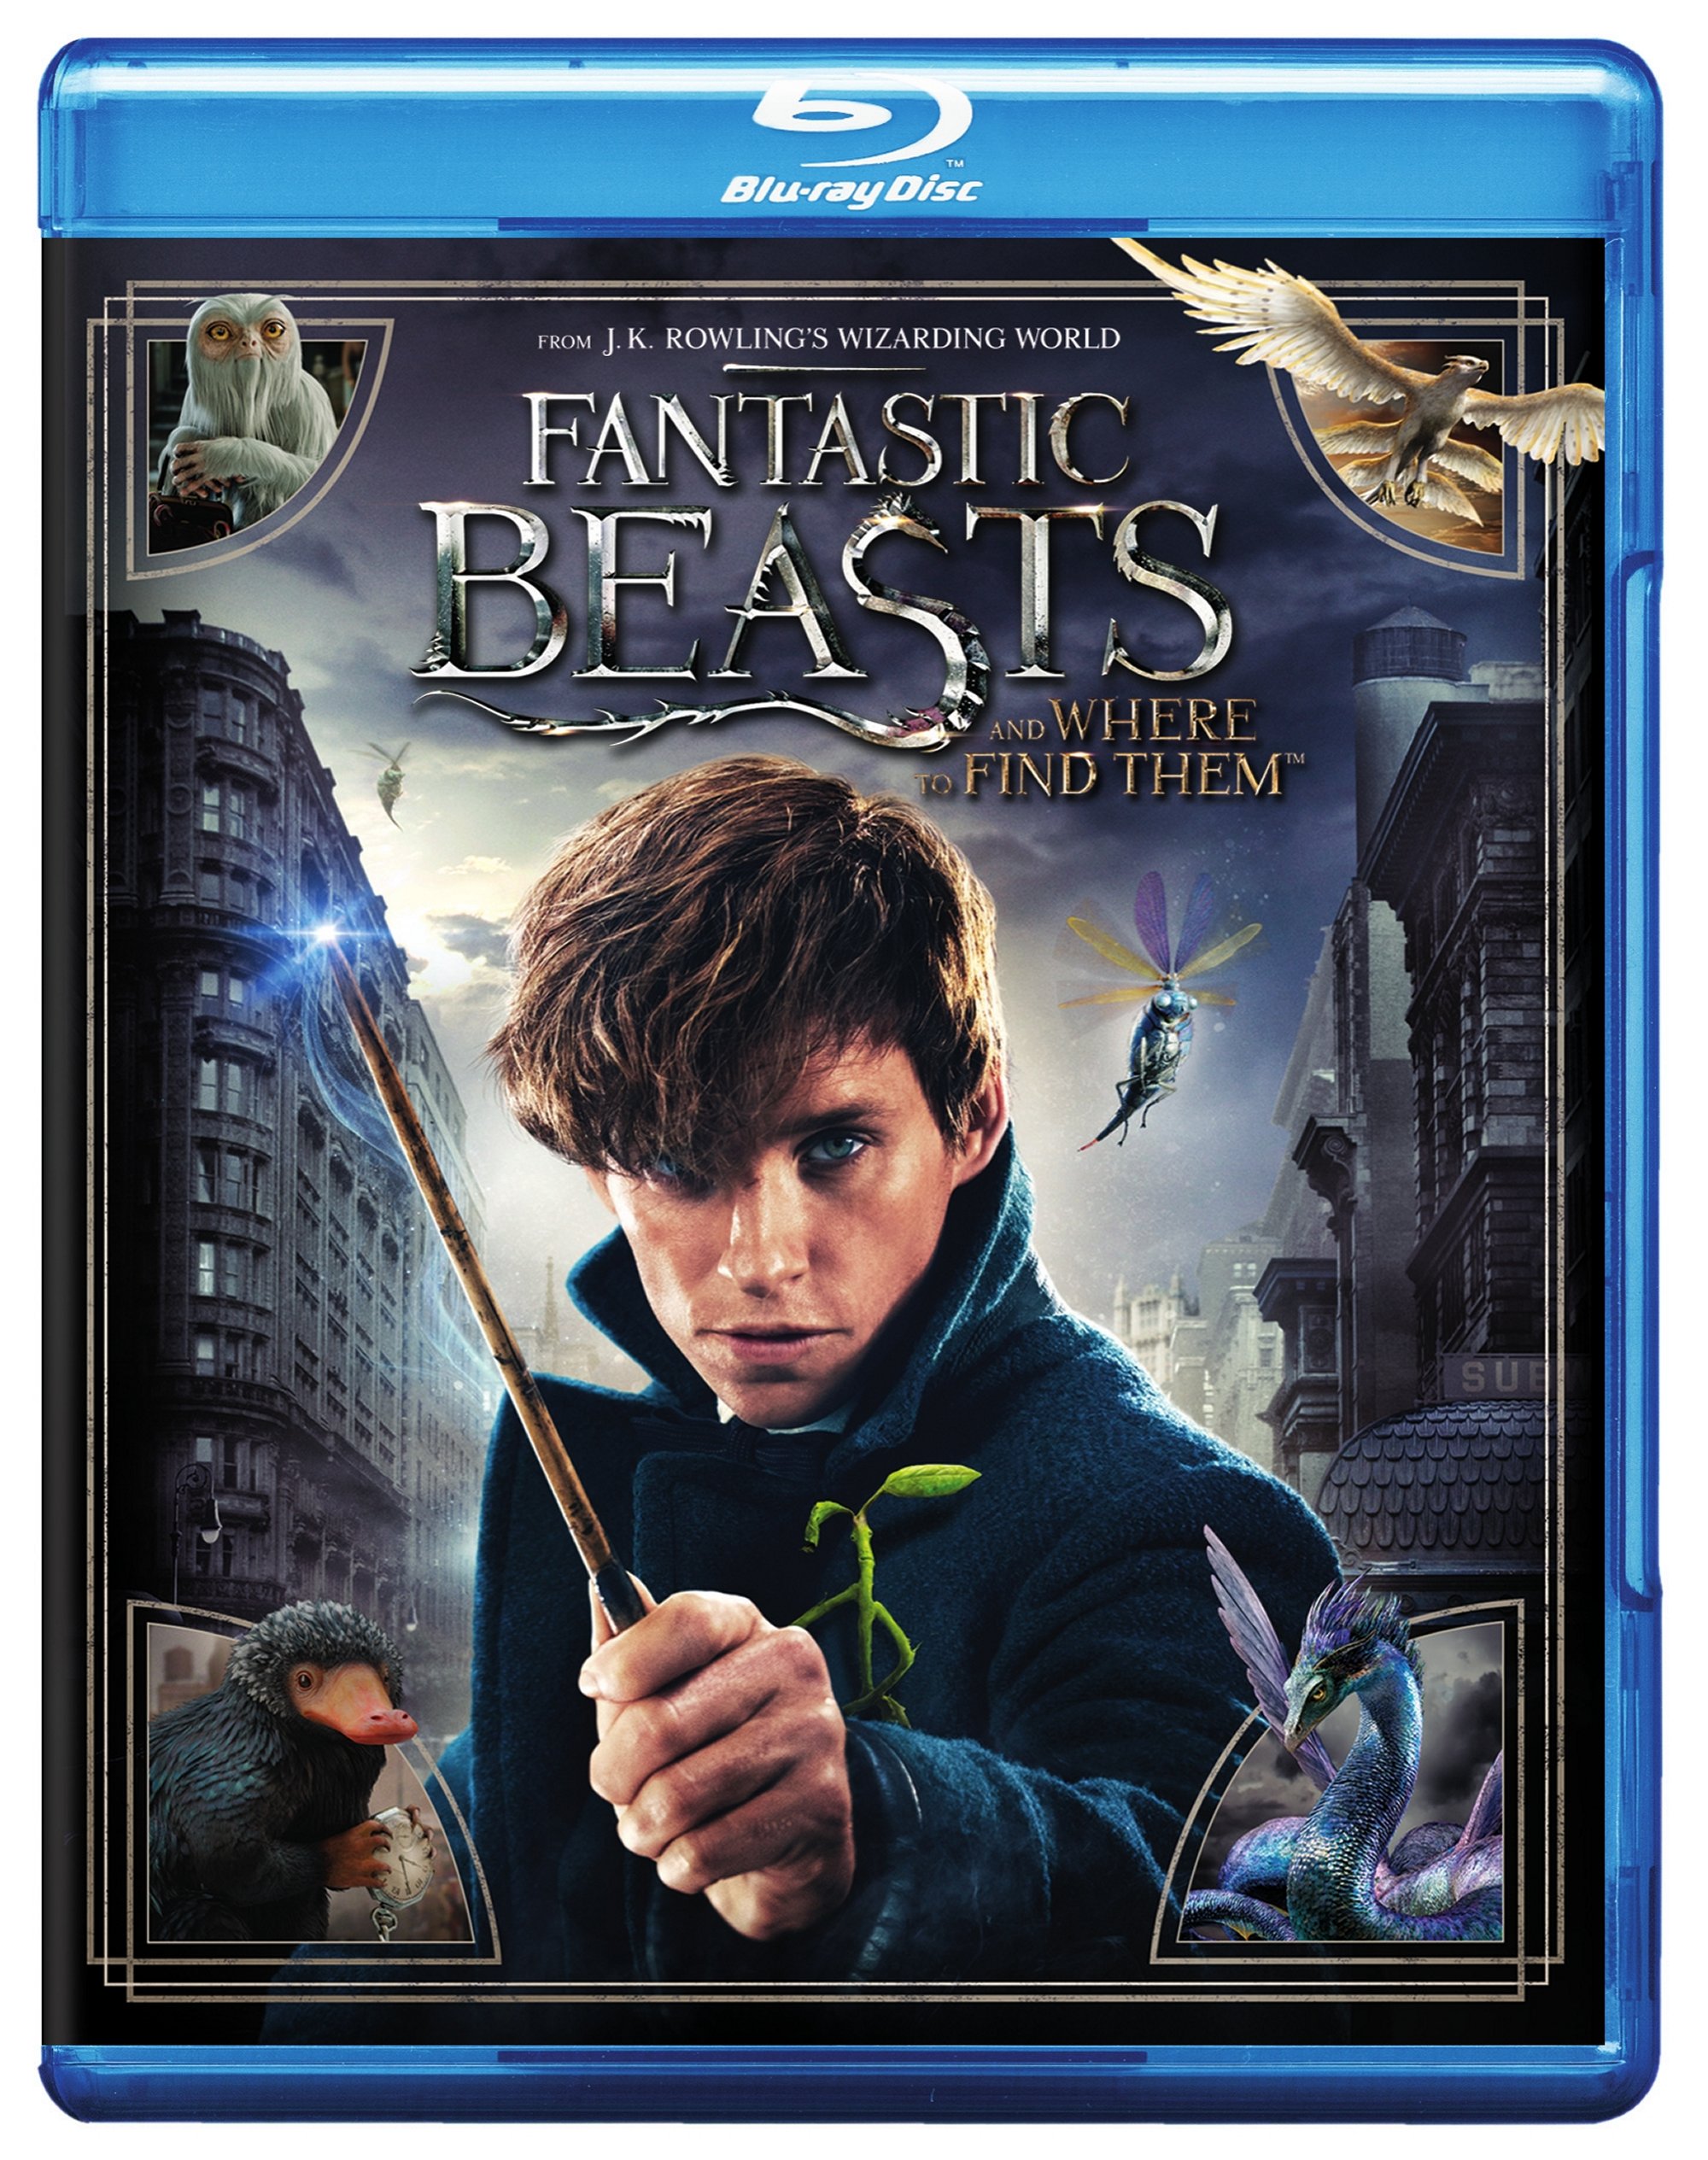 Fantastic Beasts And Where To Find Them - Blu-ray [ 2016 ]  - Adventure Movies On Blu-ray - Movies On GRUV